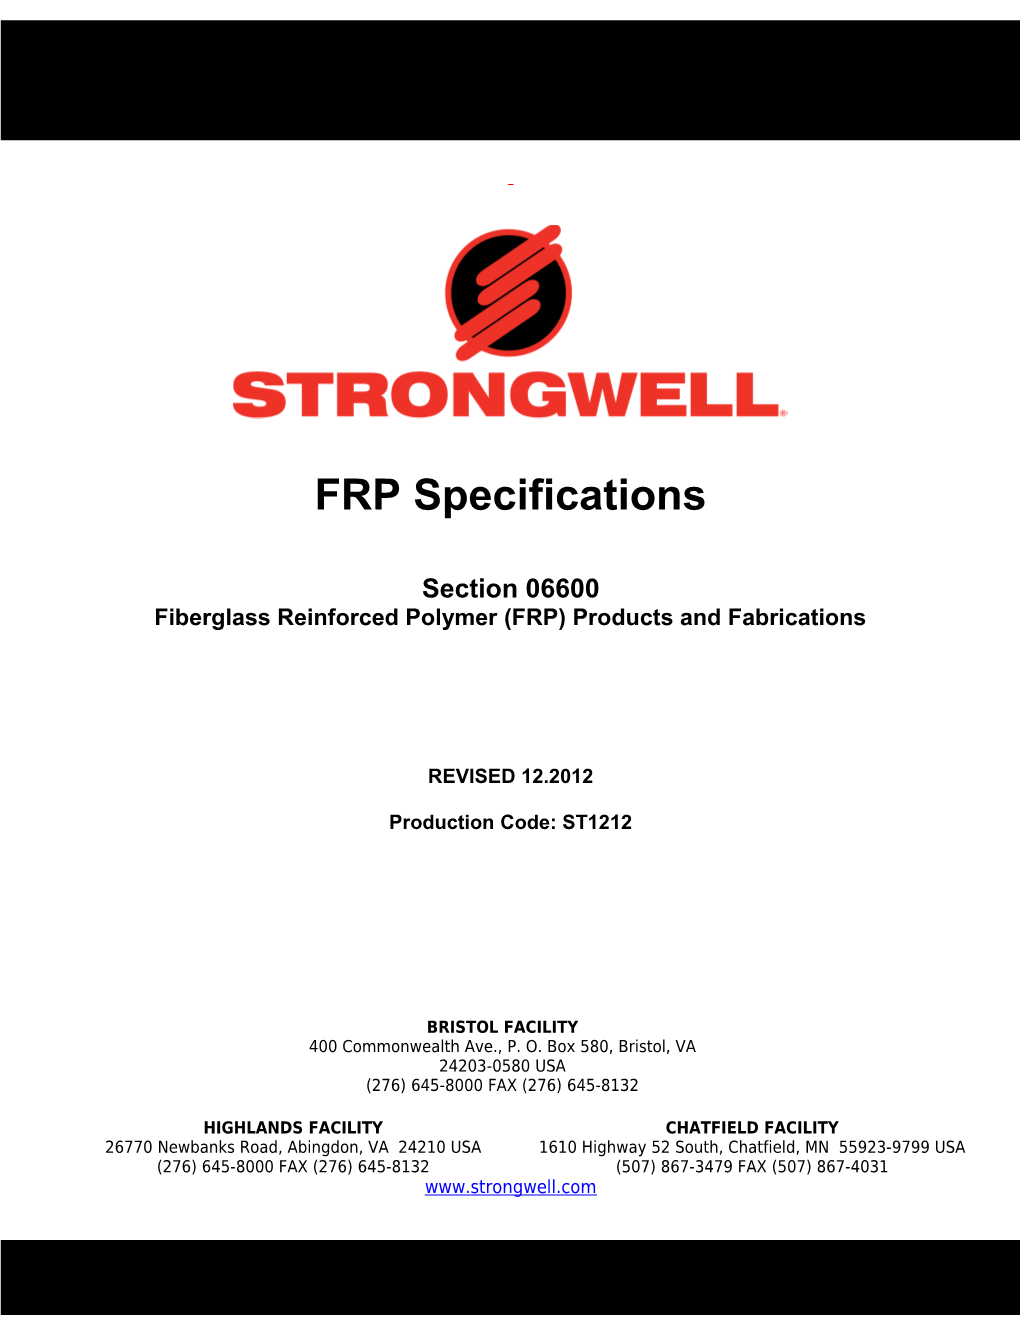 Fiberglass Reinforced Polymer (FRP) Products and Fabrications